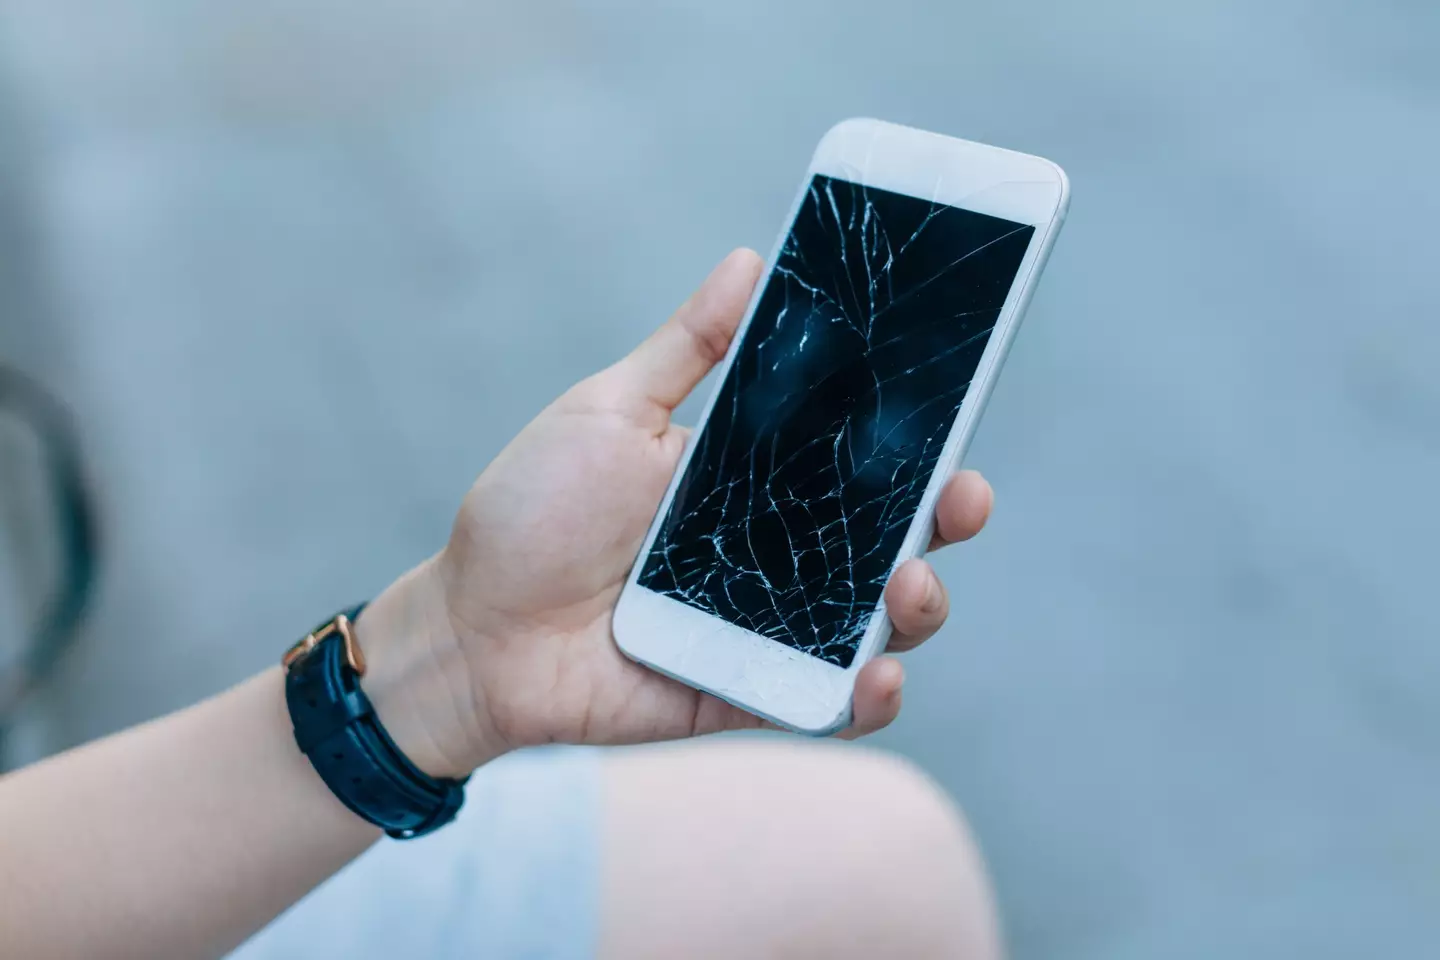 If a phone you bought arrived smashed, you need to know your rights when it comes to getting a replacement.